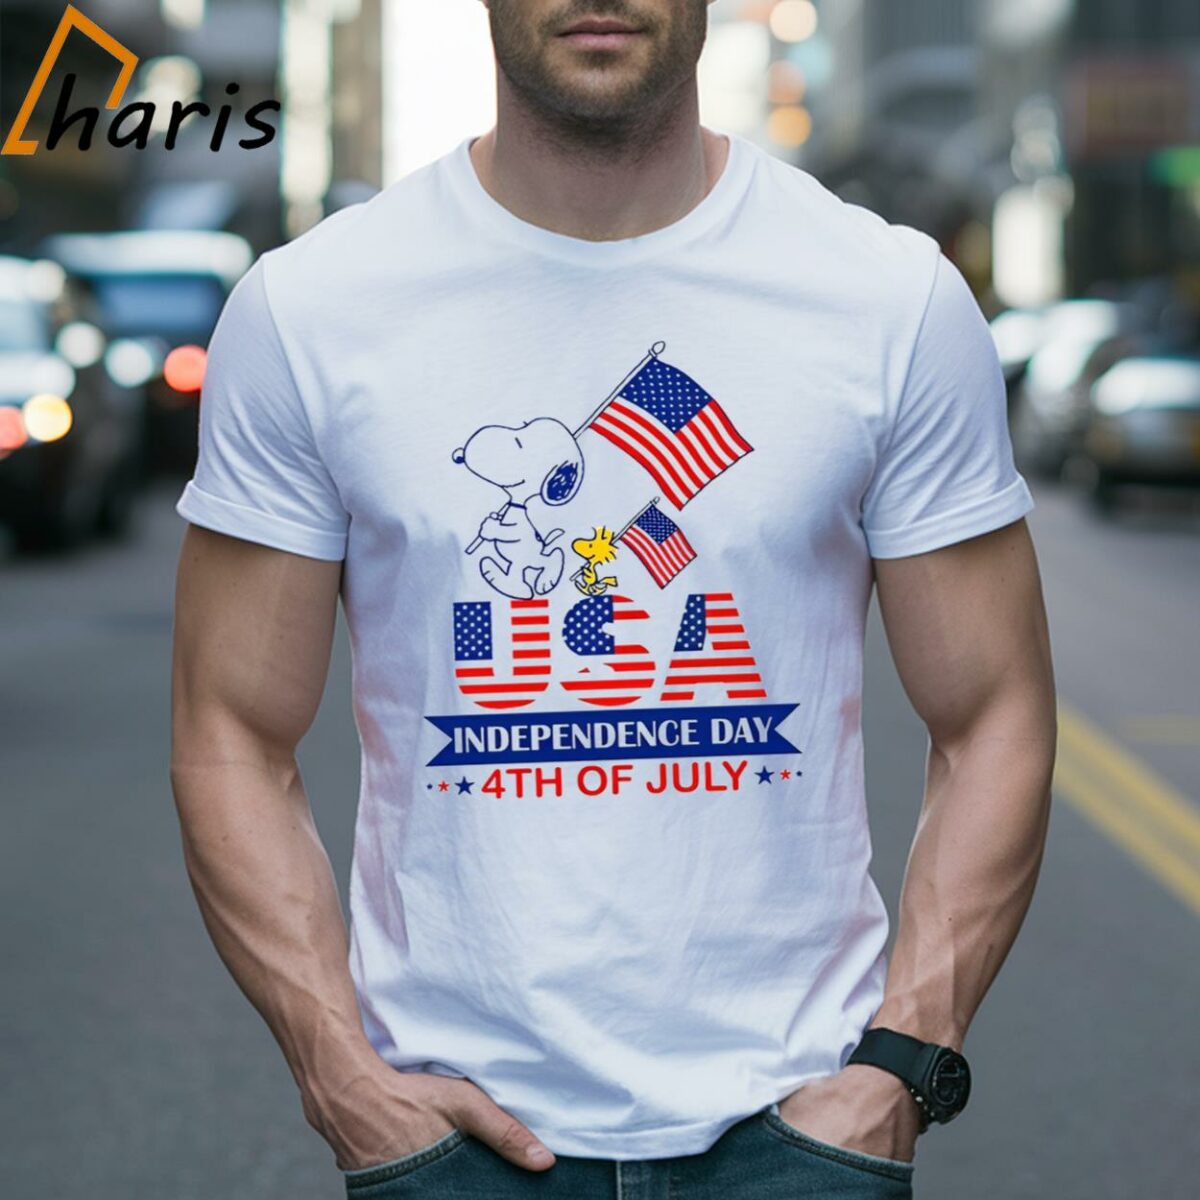 Happy 4th July USA Independence Day Shirt 2 Shirt